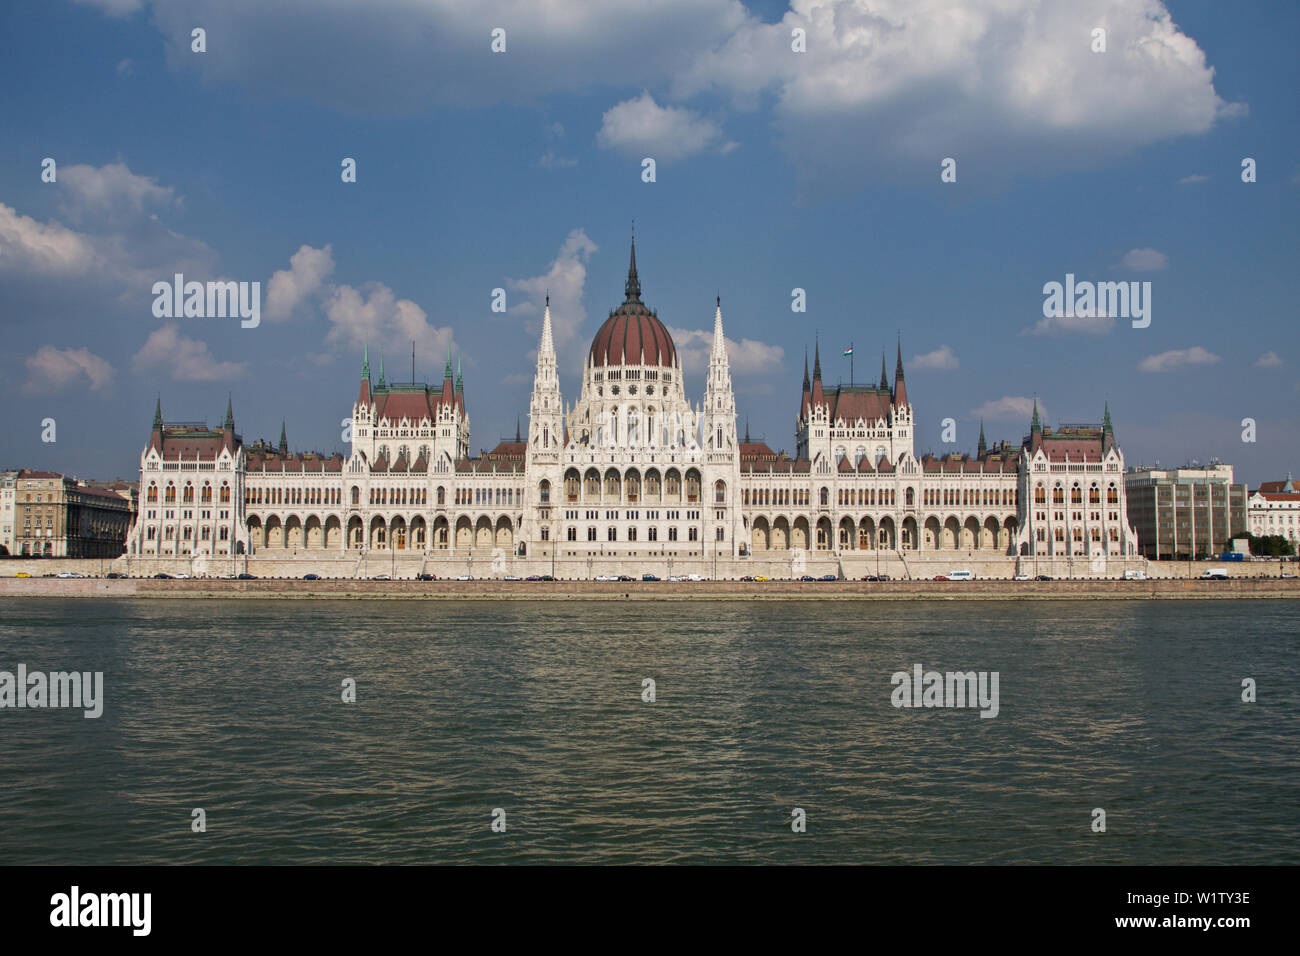 The Hungarian Parliament Building stands on a broad curve of the river Danube, Budapest and was designed by Hungarian architect Imre Steindl Stock Photo